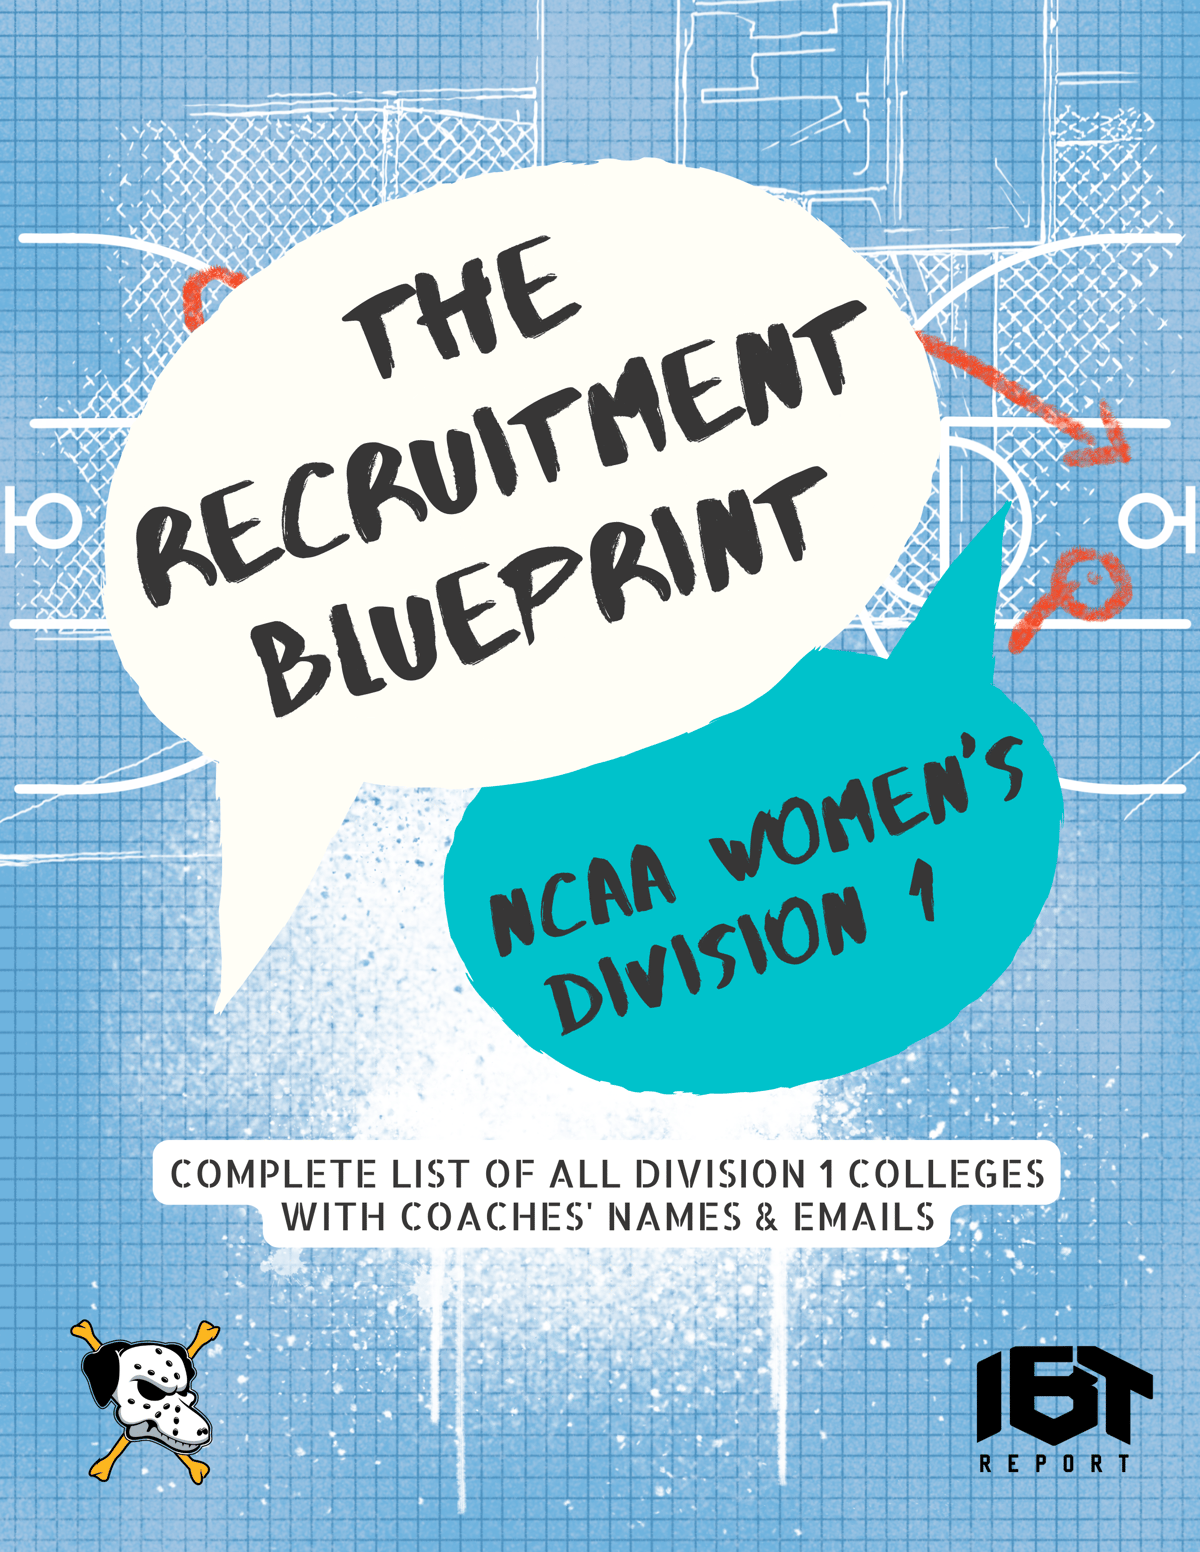 Image of The Recruitment Blueprint (Women's NCAA Division 1)